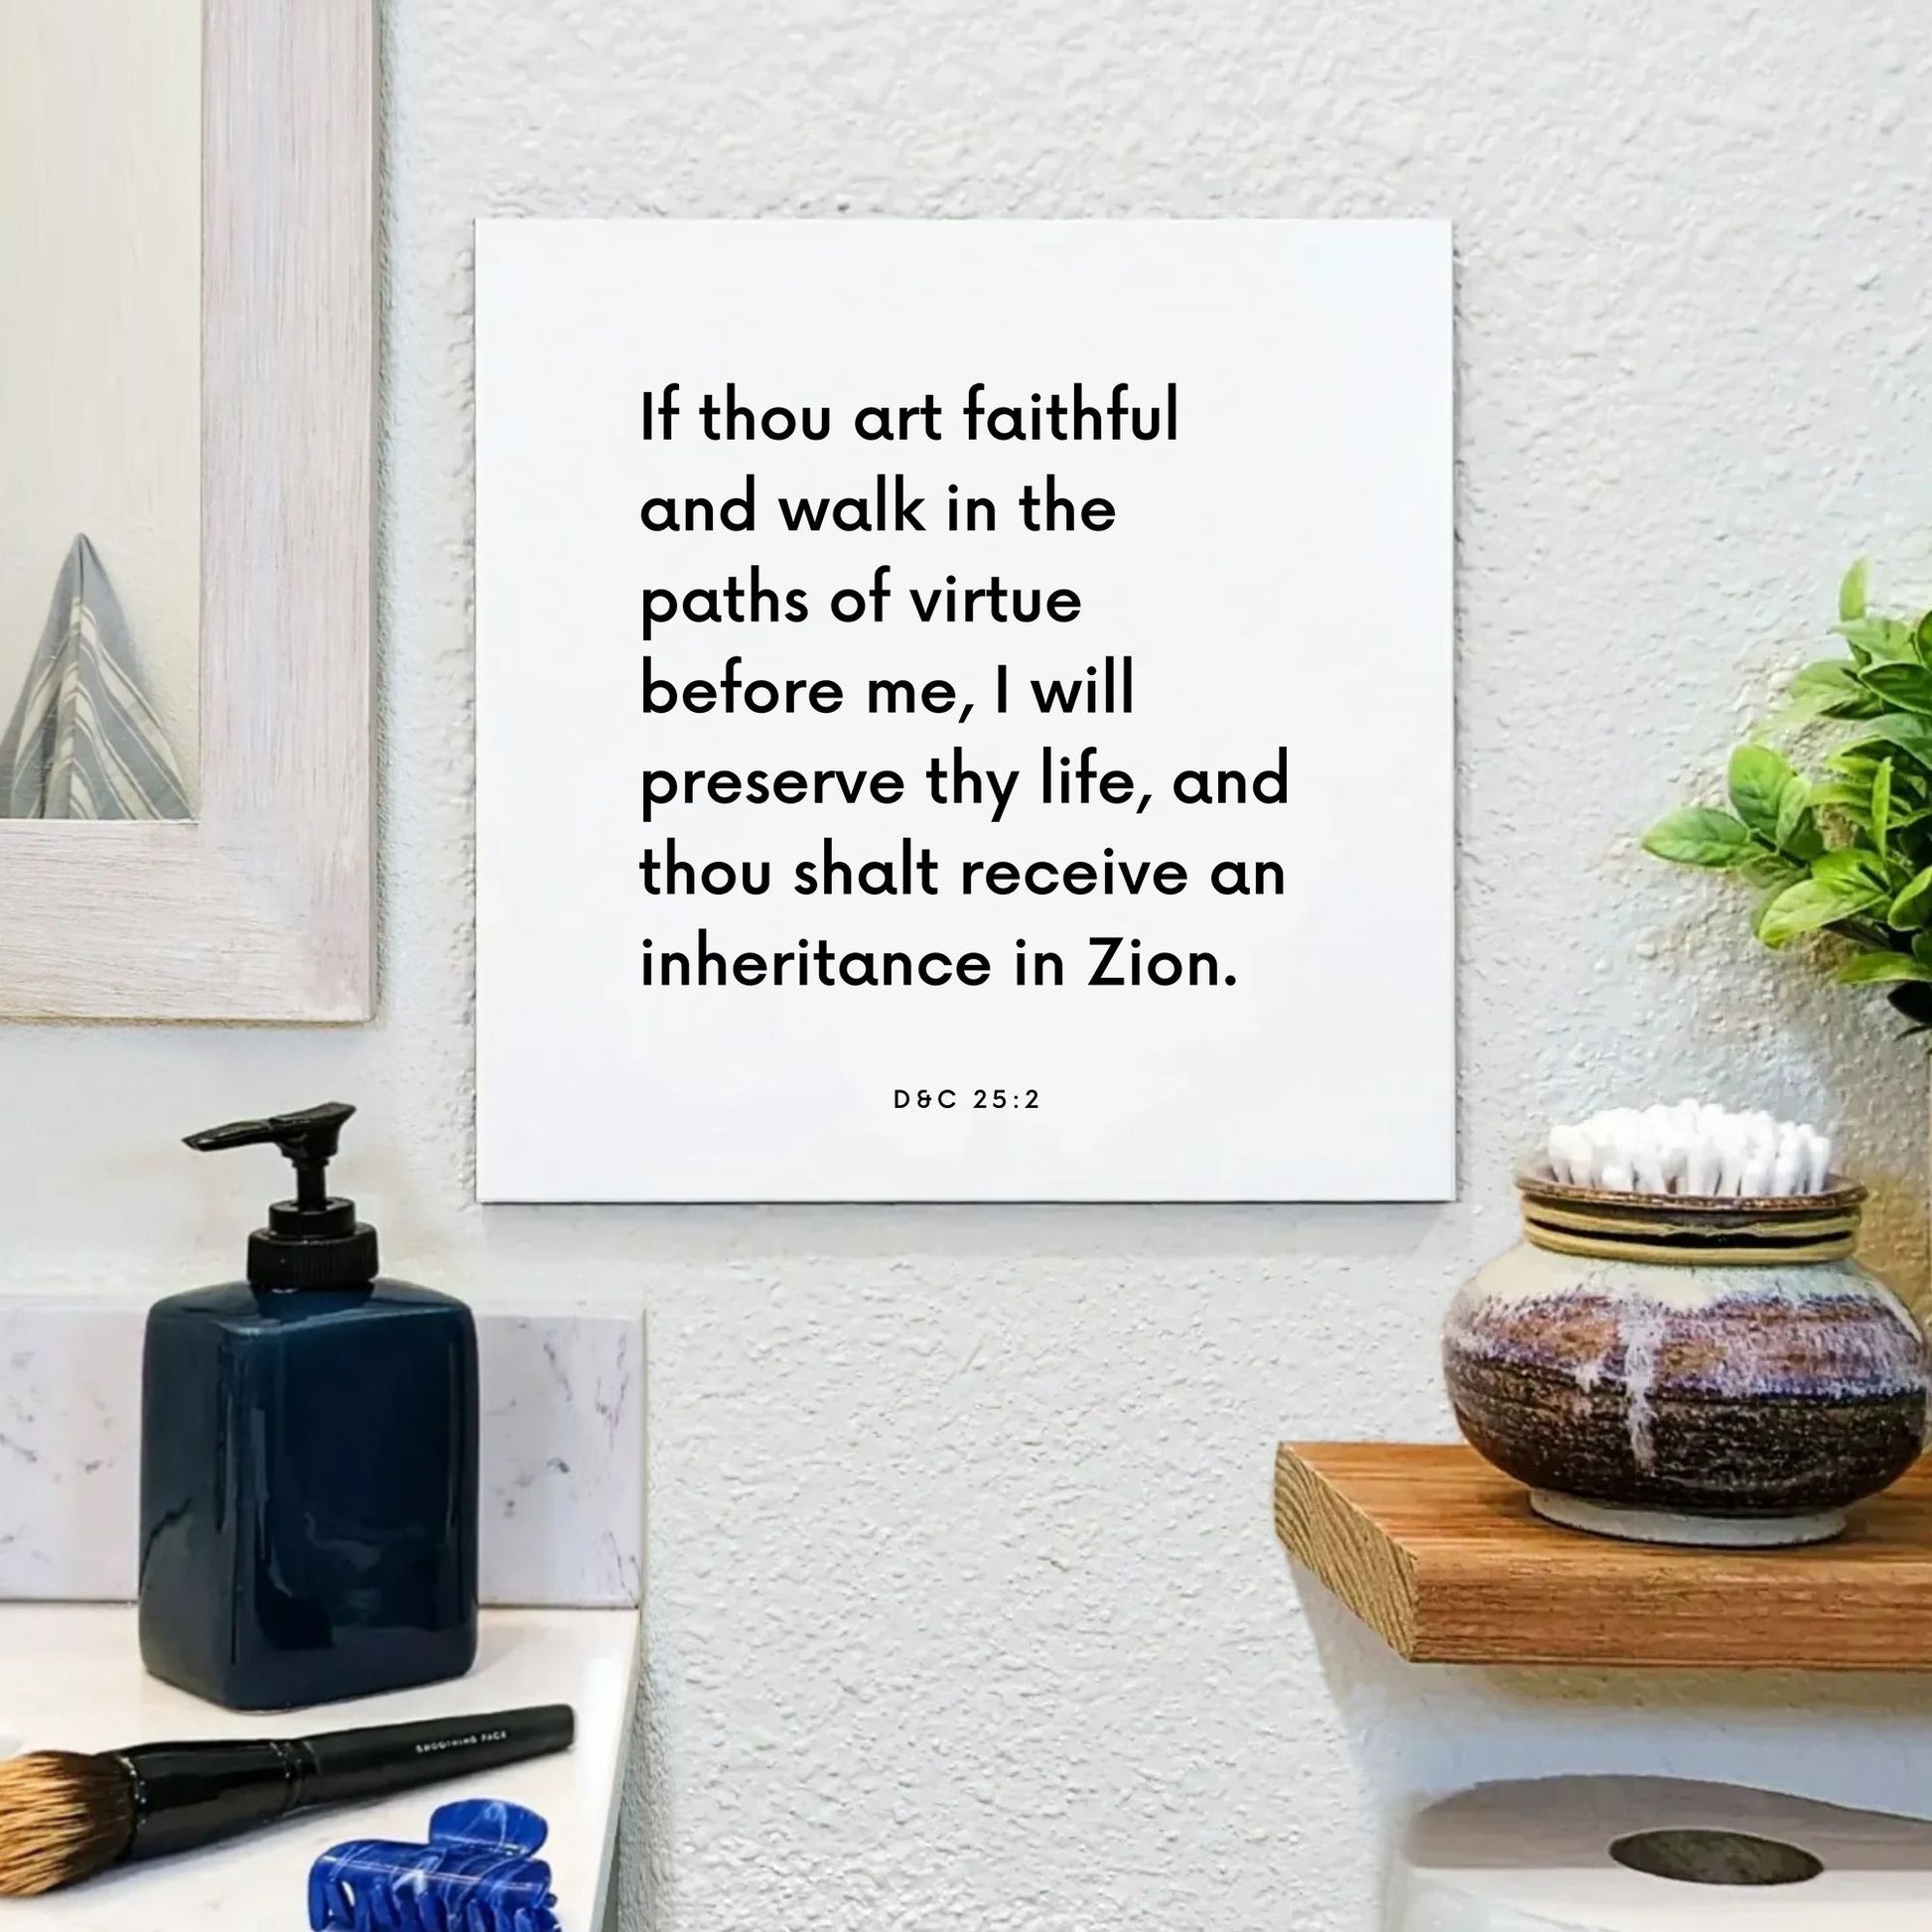 Bathroom mouting of the scripture tile for D&C 25:2 - "If thou art faithful and walk in the paths of virtue"